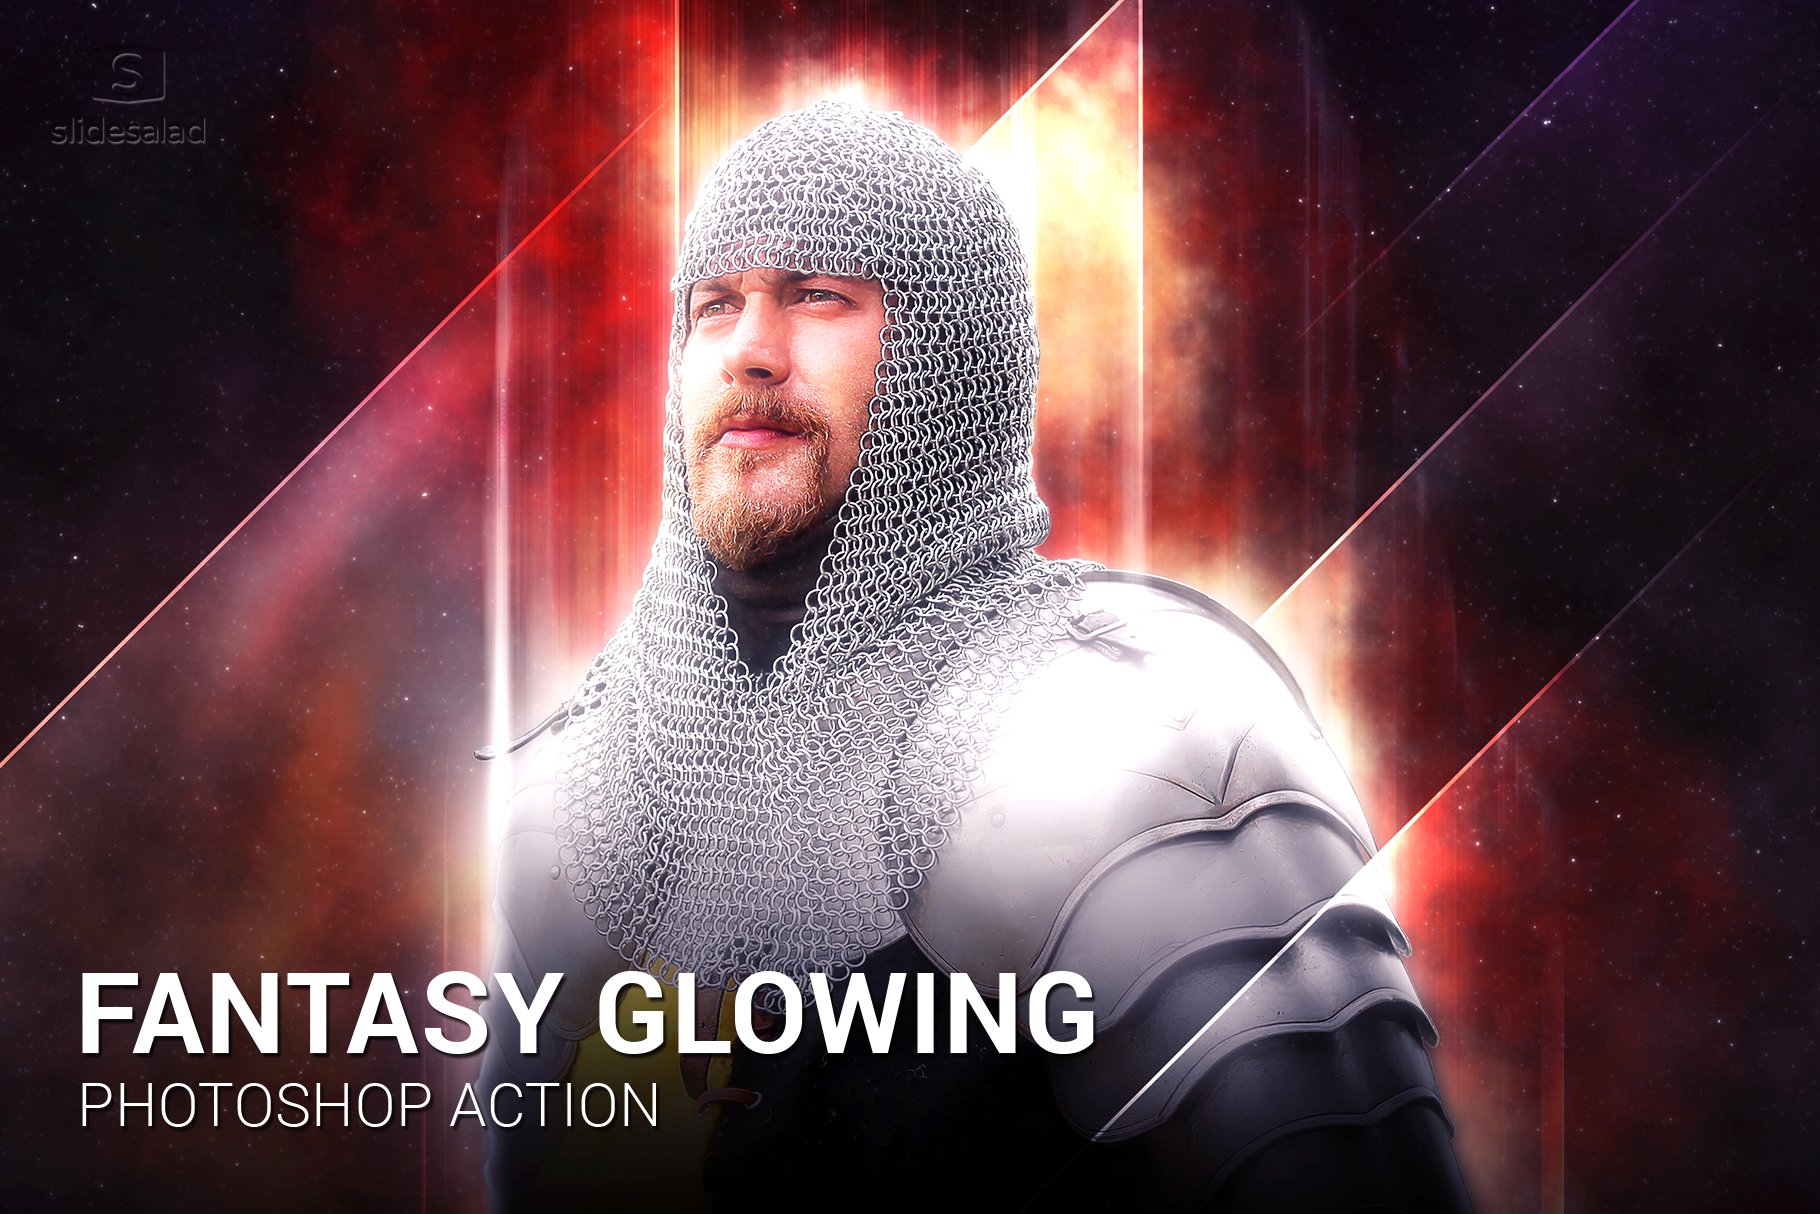 Fantasy Glowing Photoshop Actioncover image.